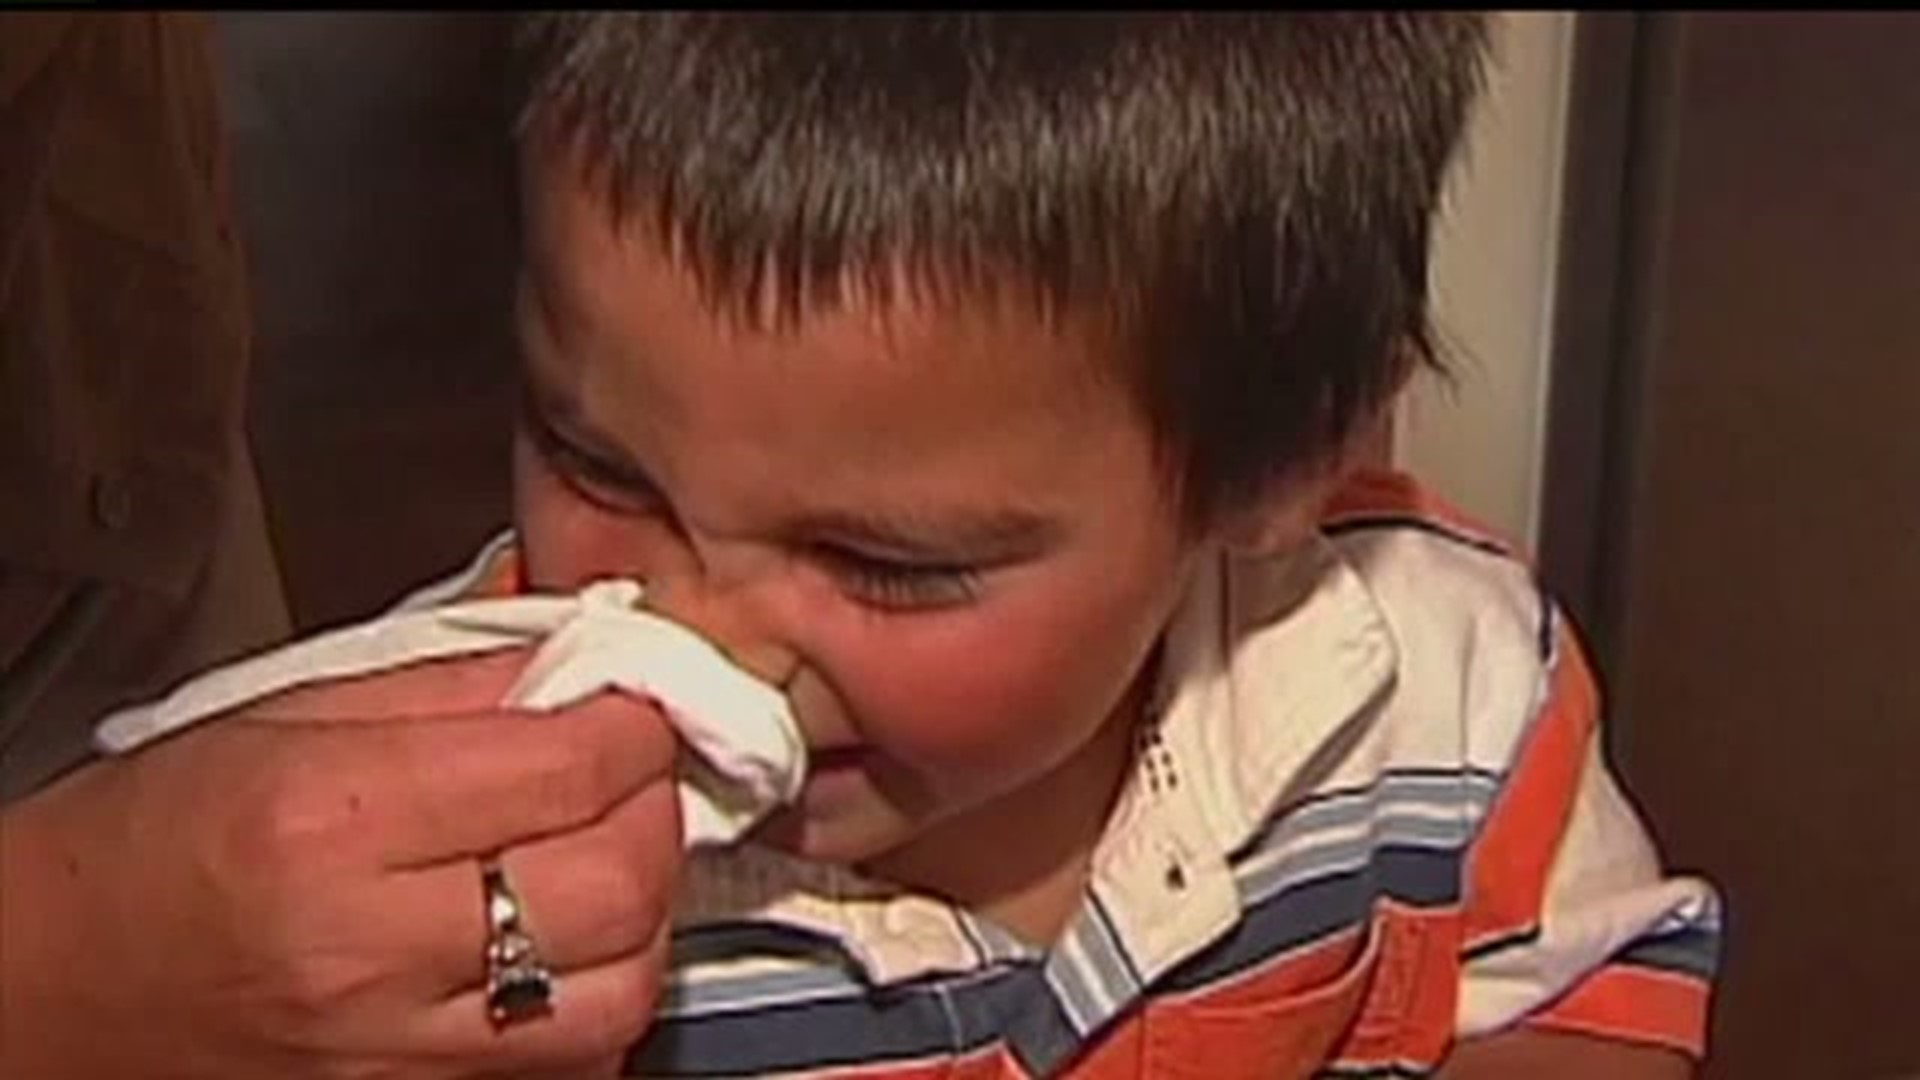 Recognizing and treating seasonal allergies during childhood